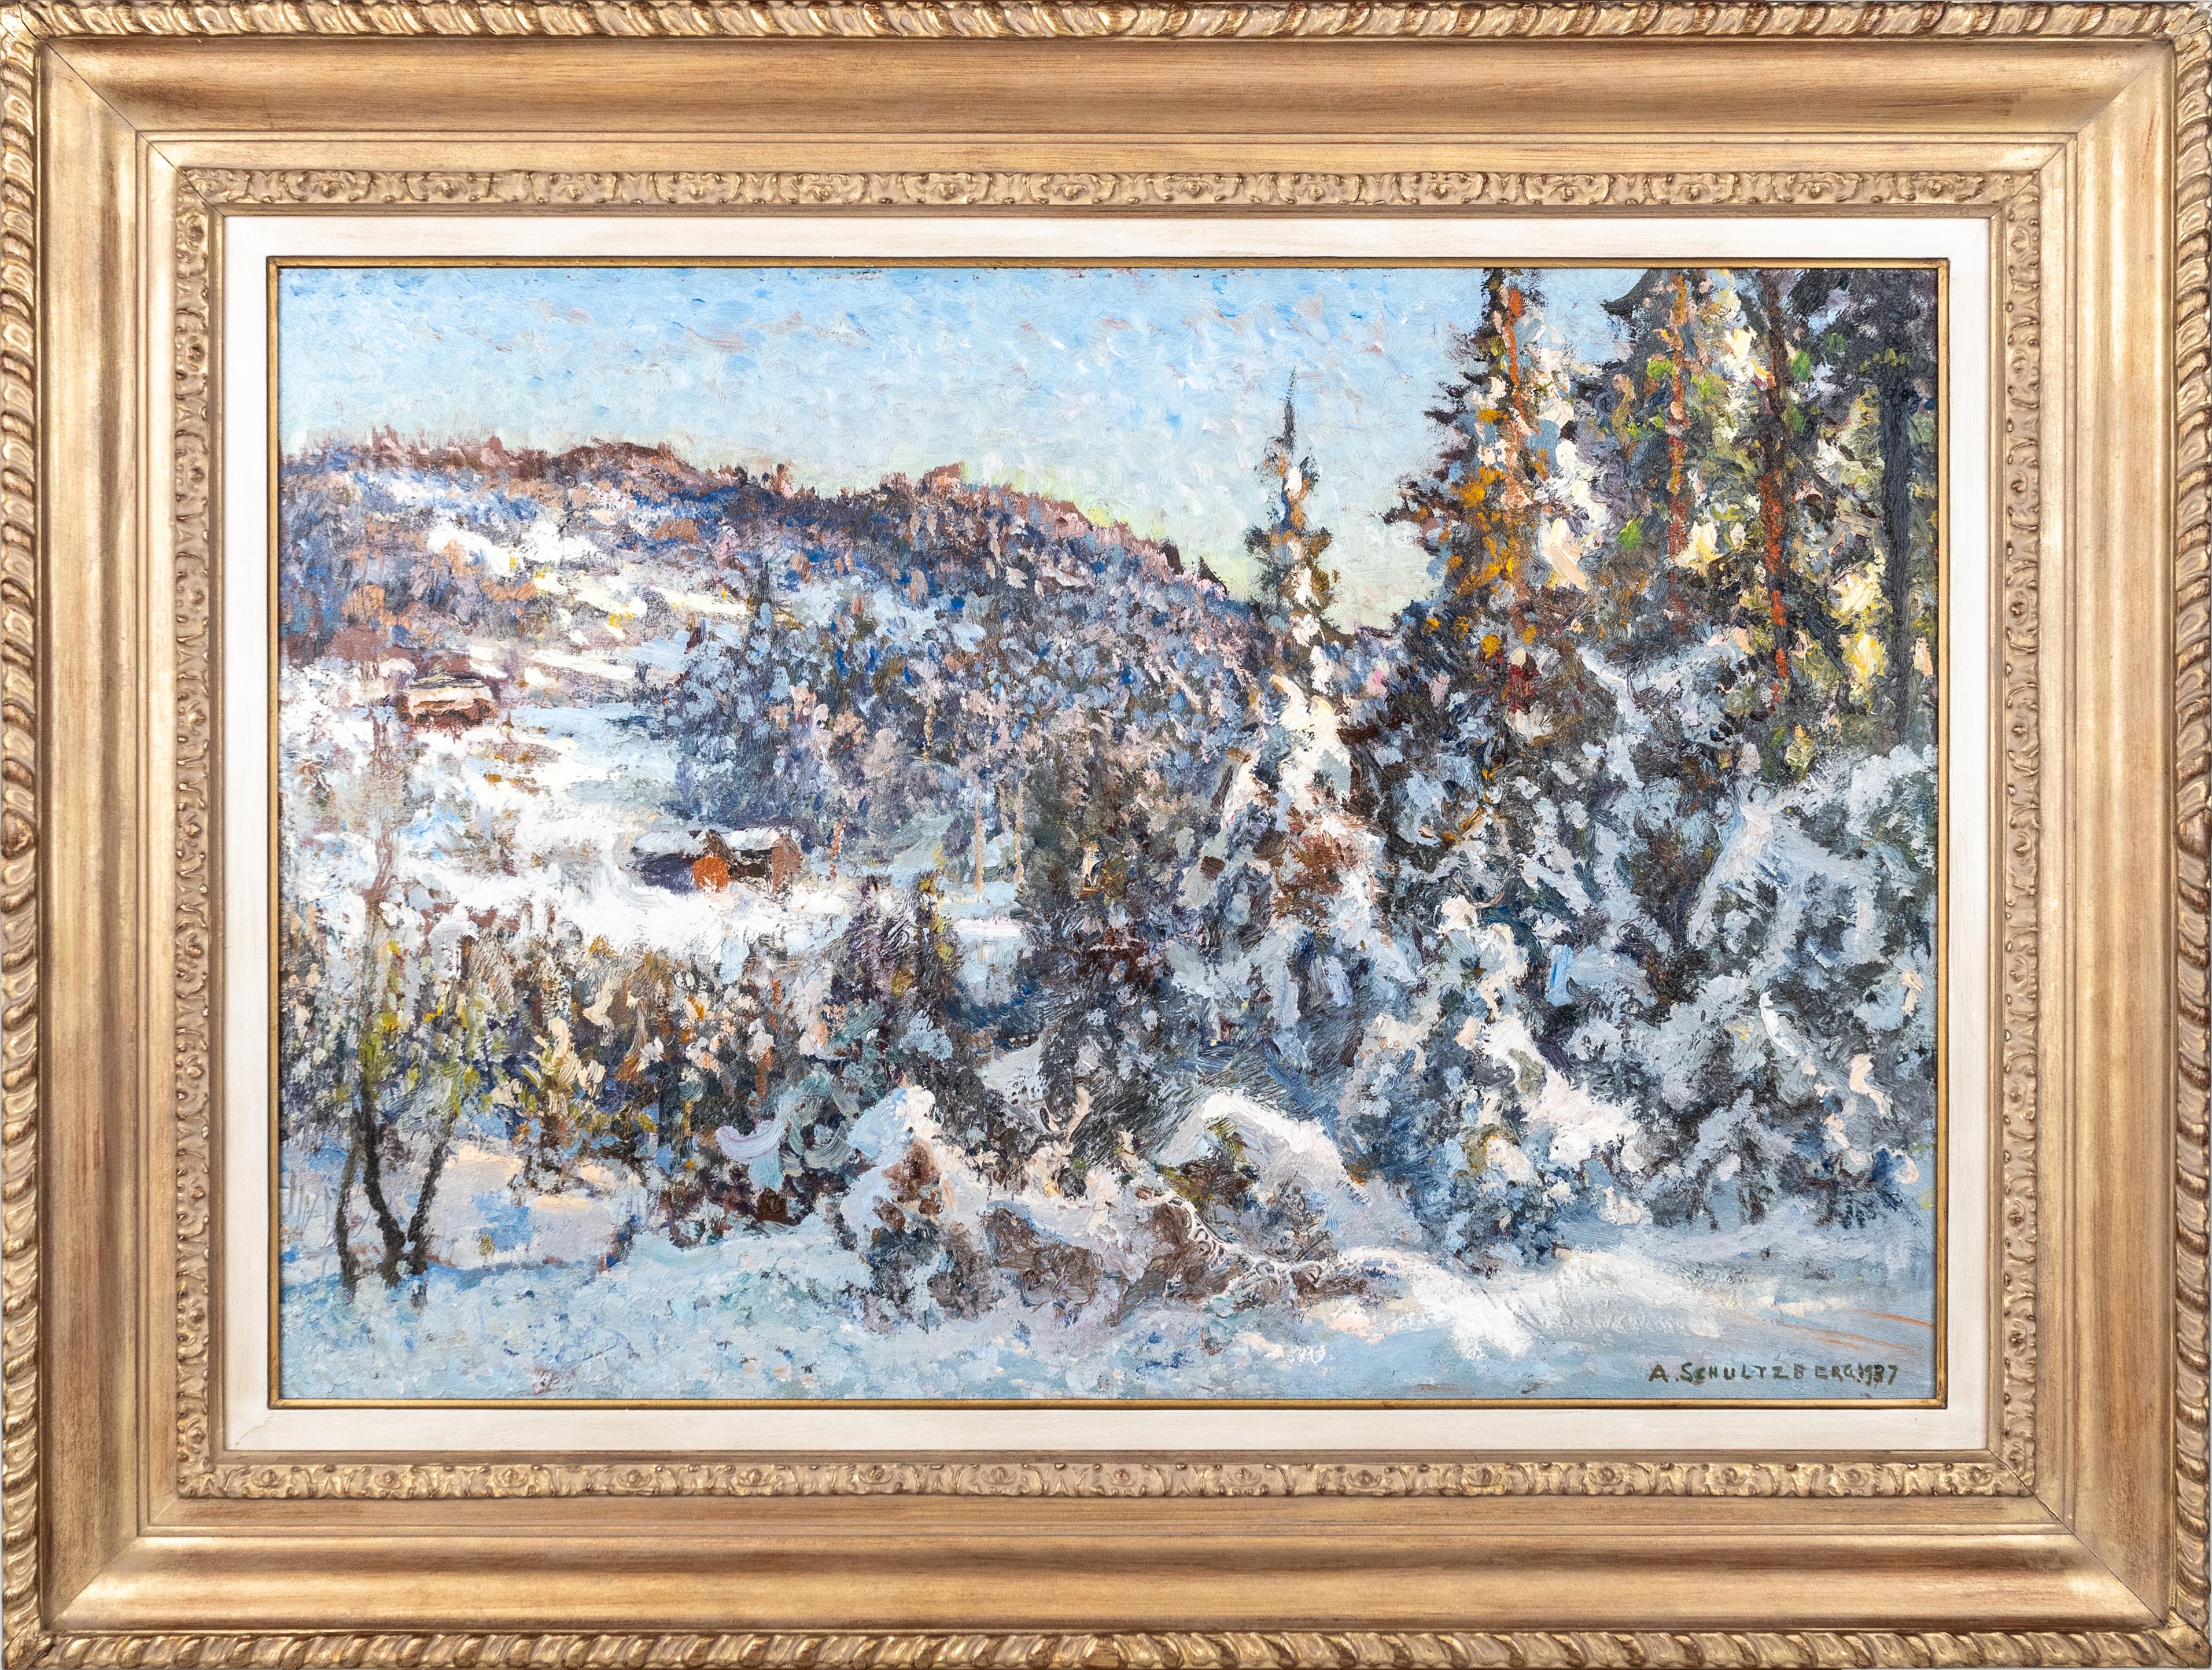 Schultzberg always captured the effects of sunlight on a winter landscape, working confidently with thick impasto.'Snowy Scene' is a beautiful example of his work, showing the woodland landscape thick with snow and bright pops of colour.